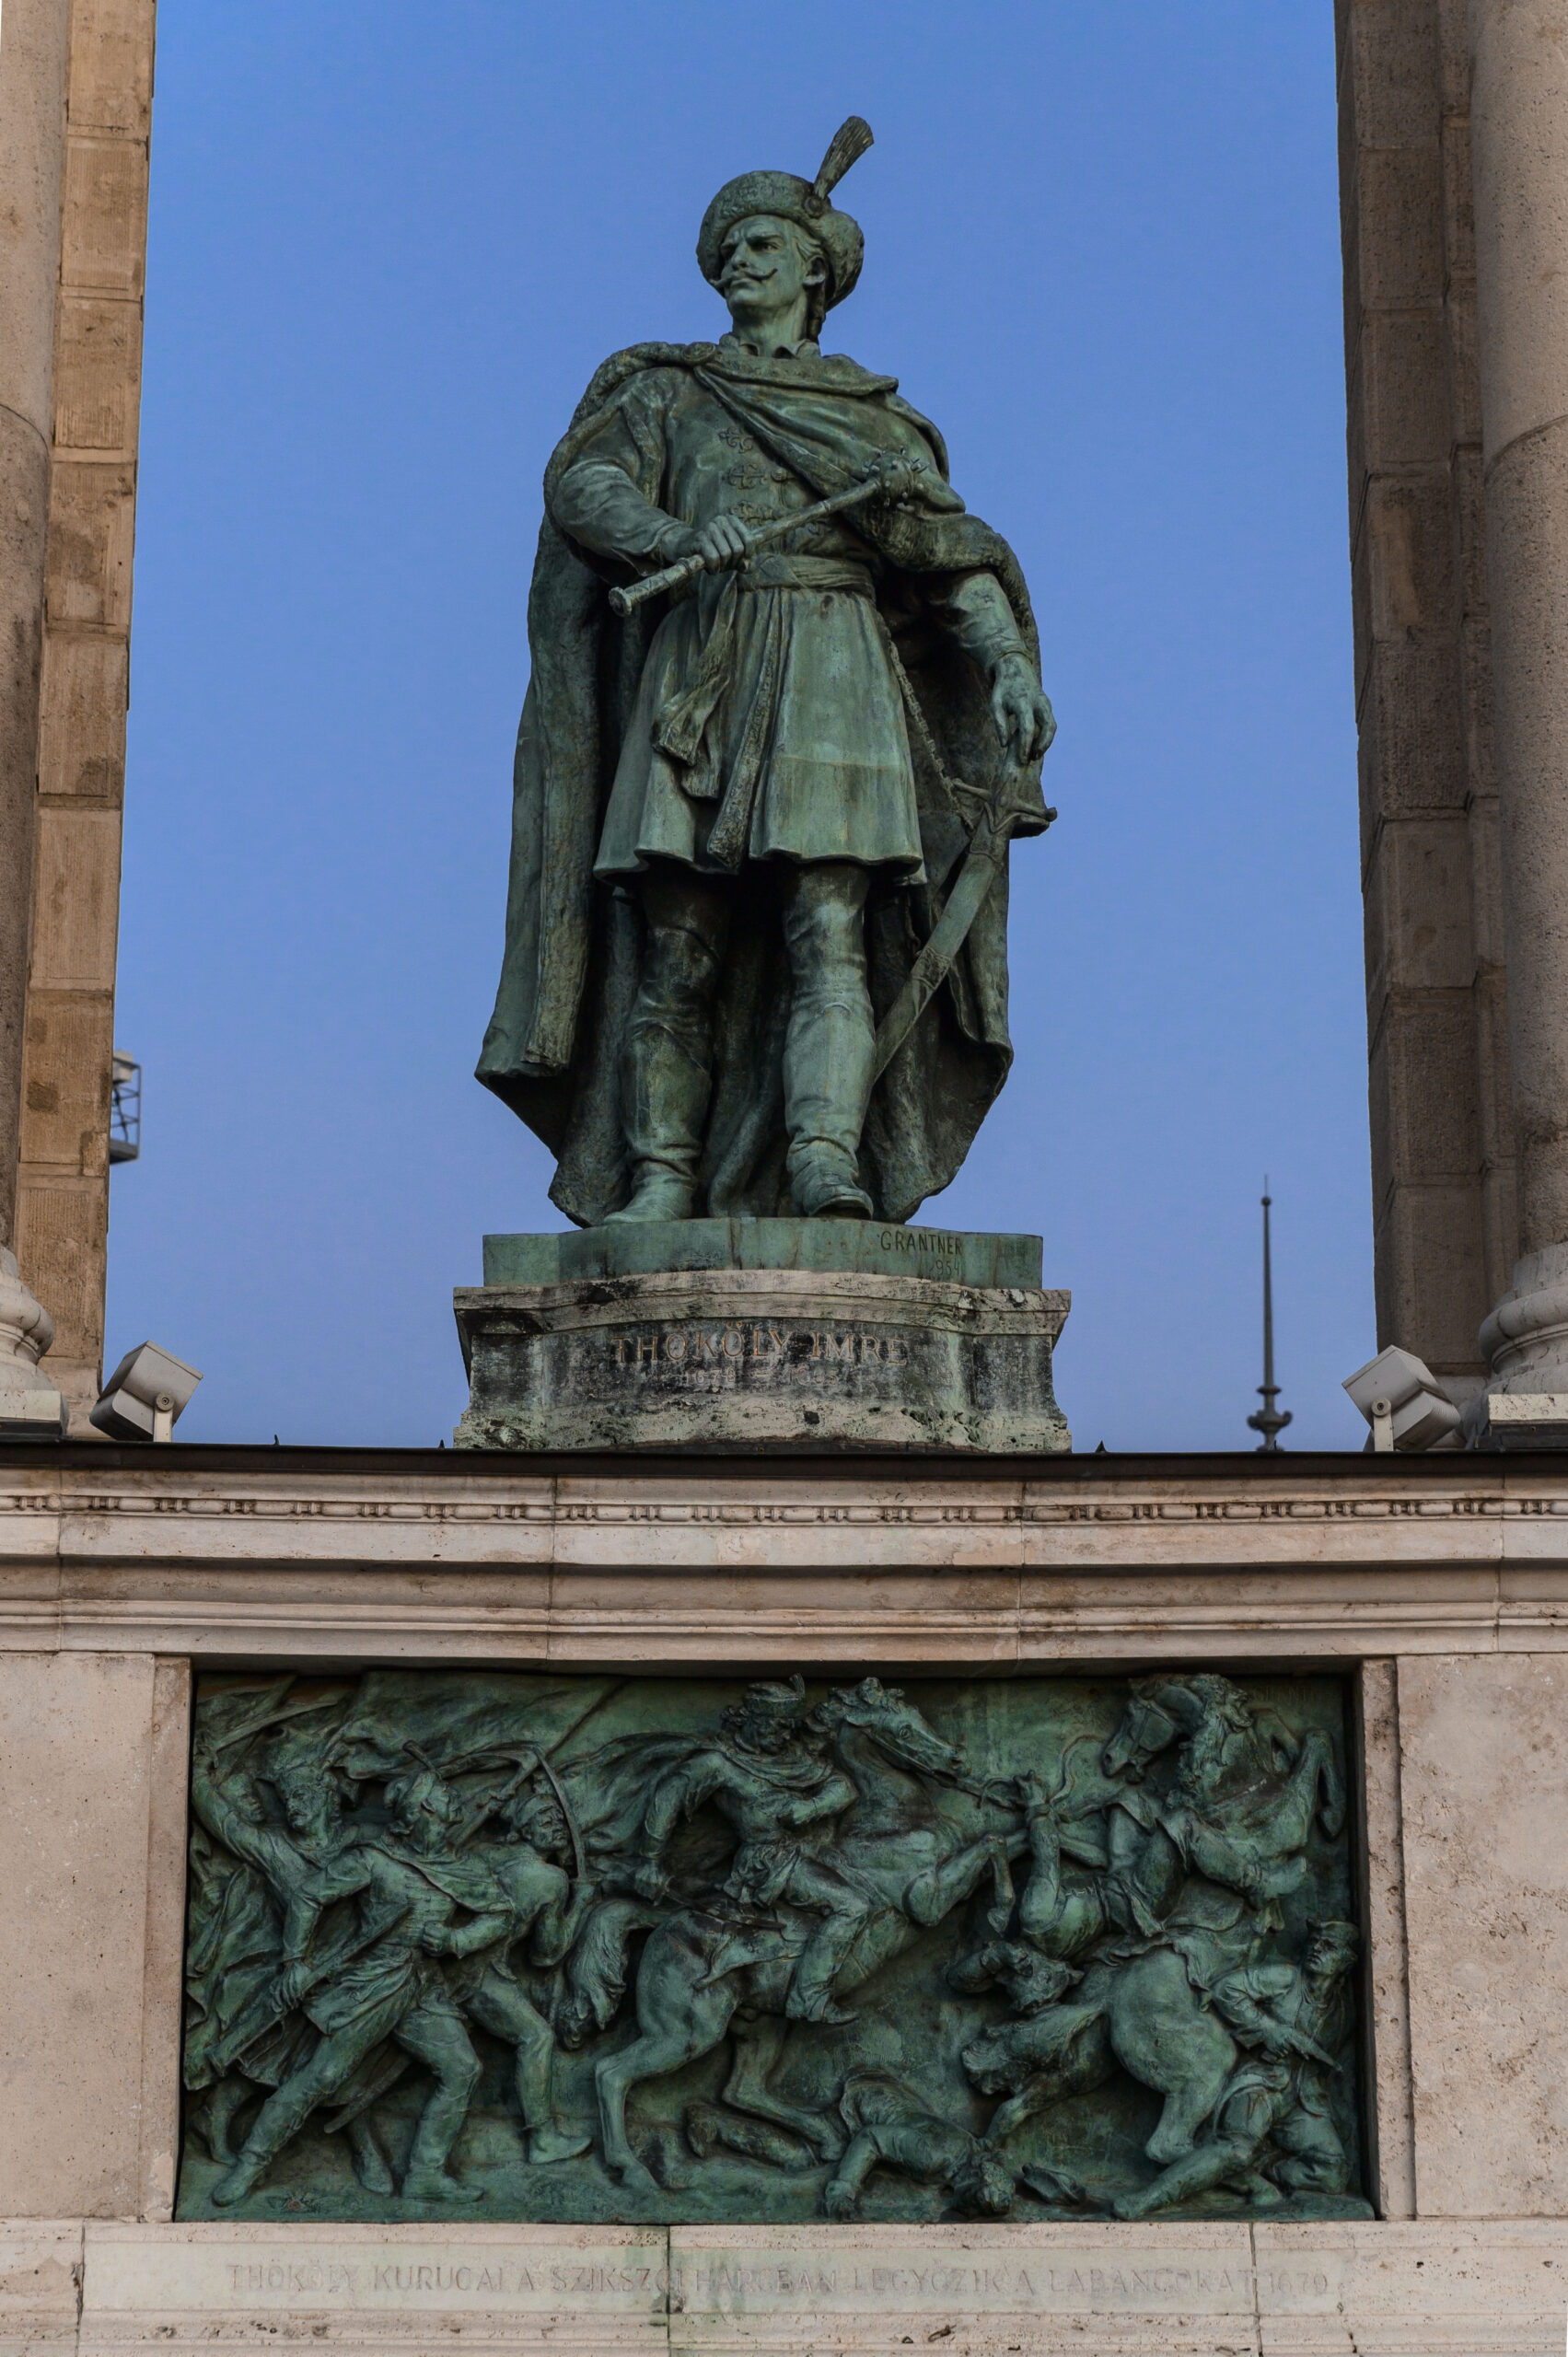 Statue of Emeric Thököly on Heroes’ Square